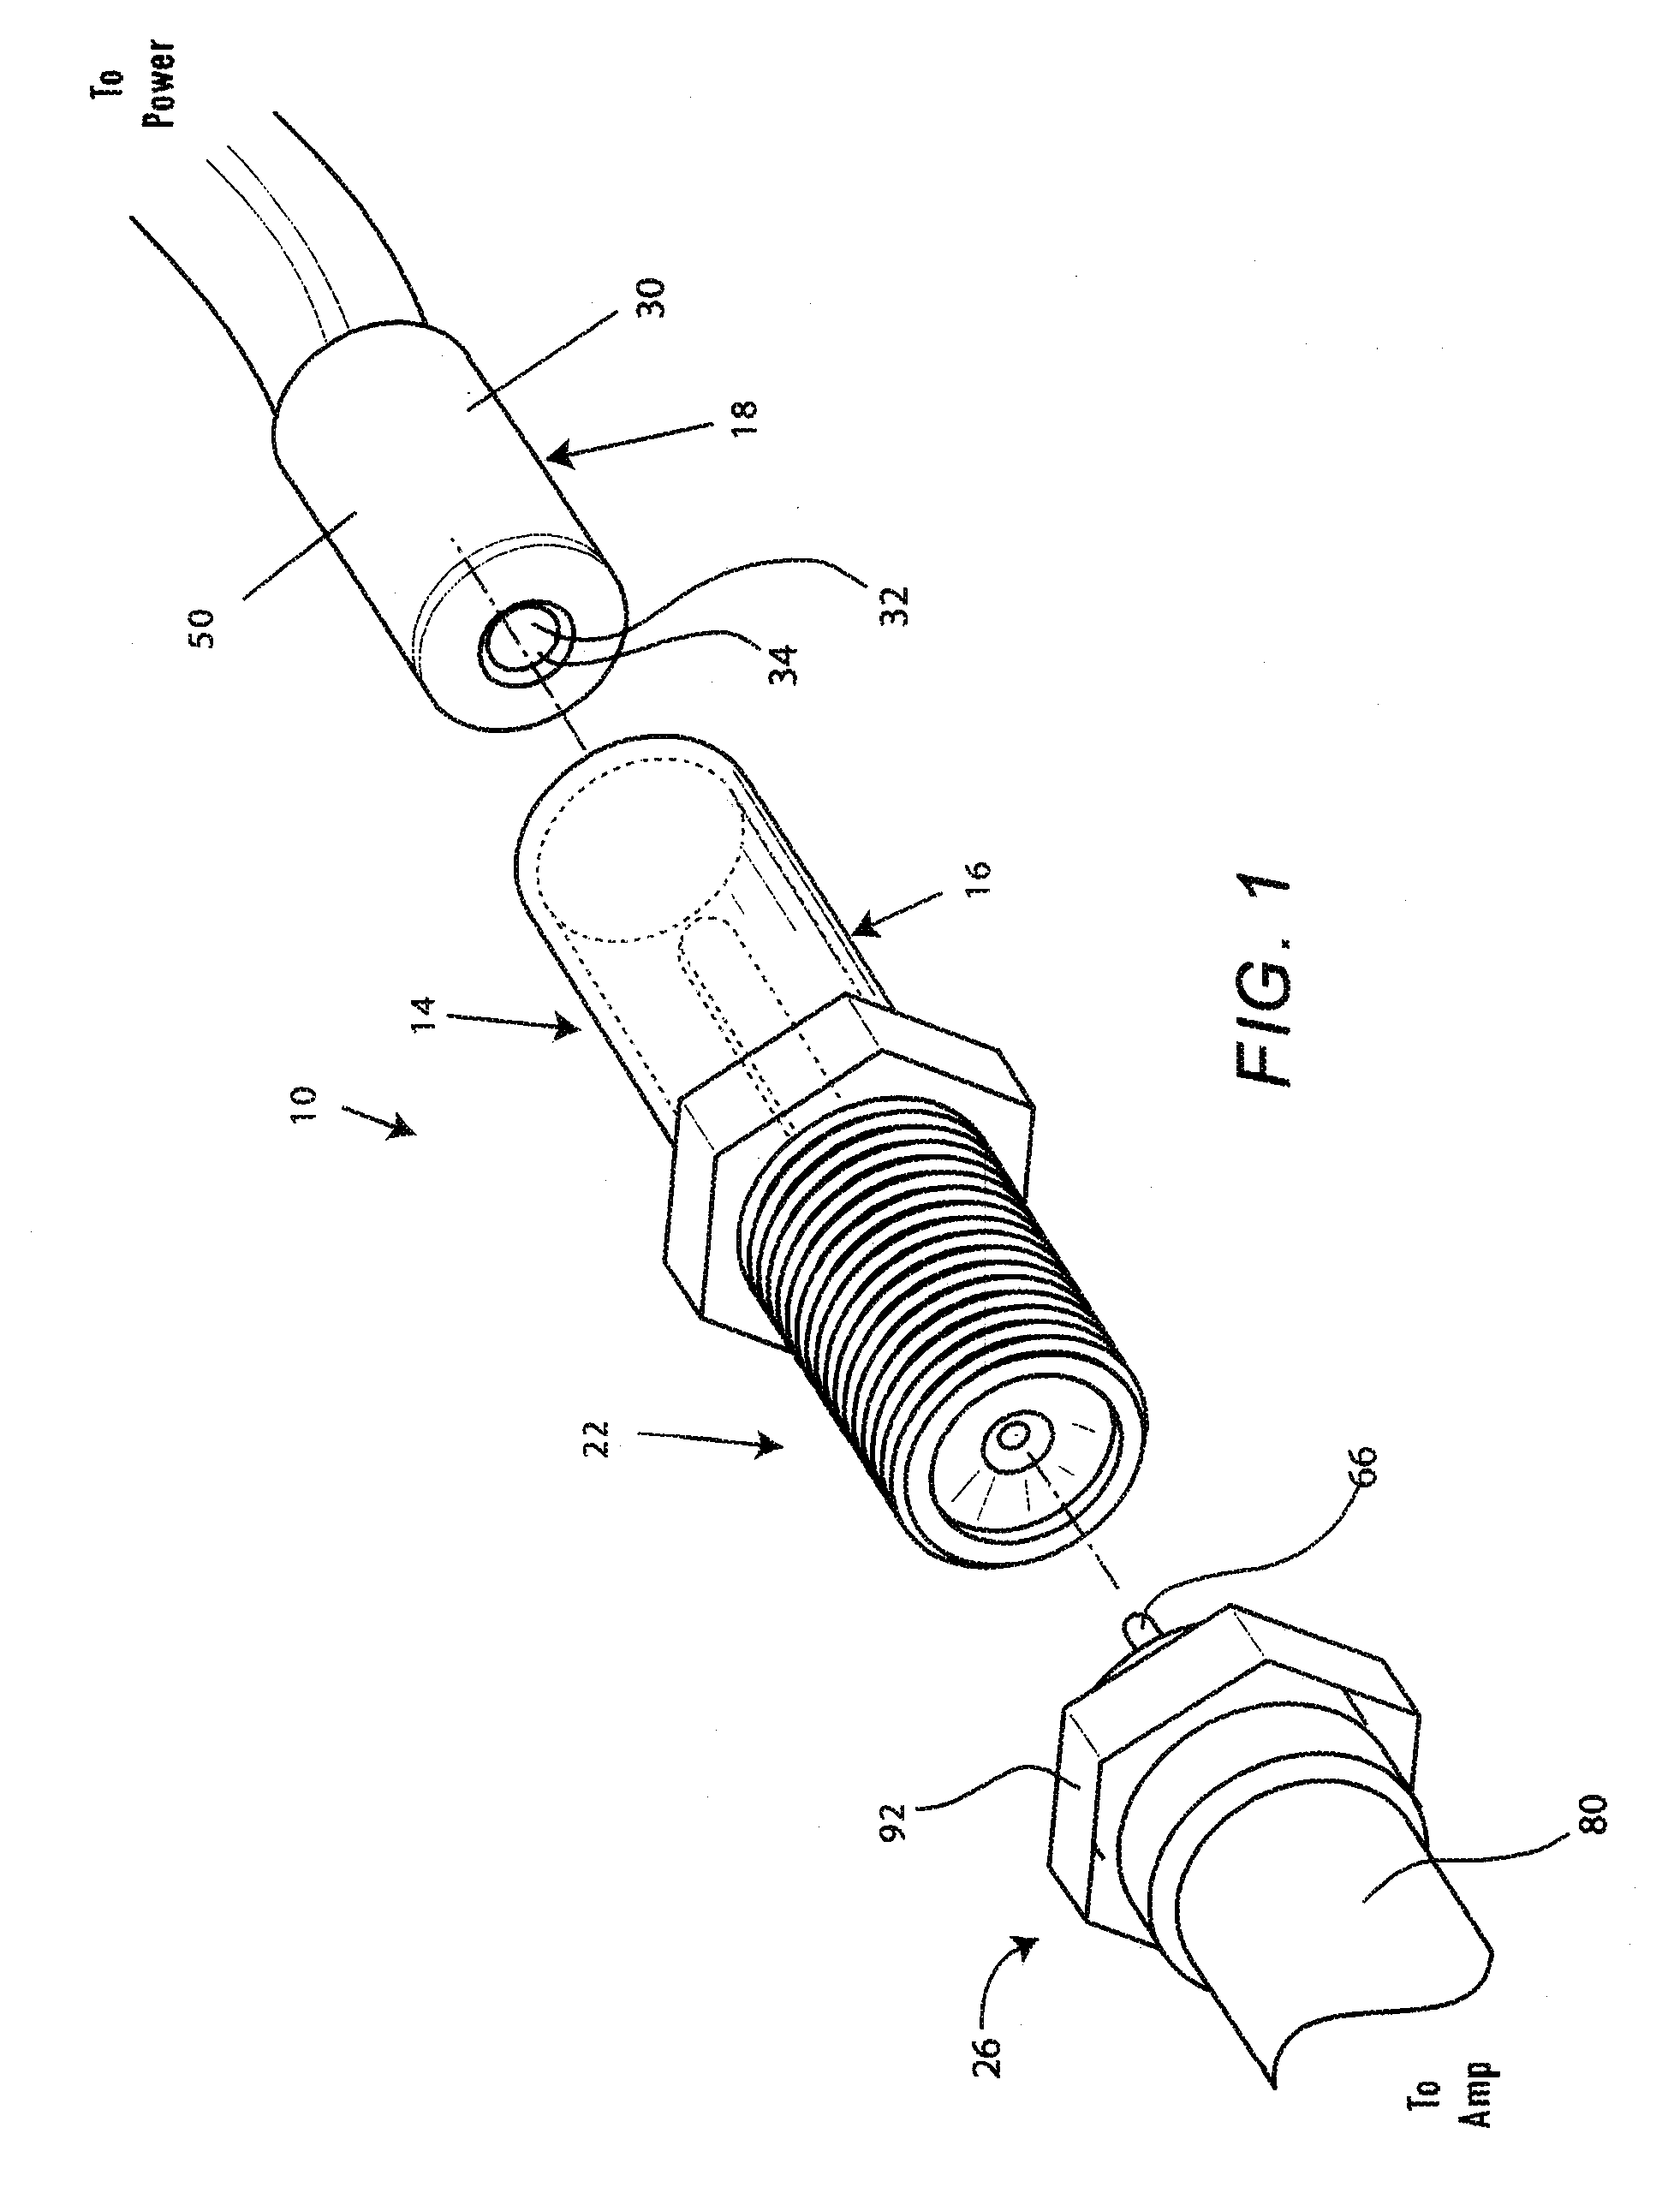 Coax-to-power adapter